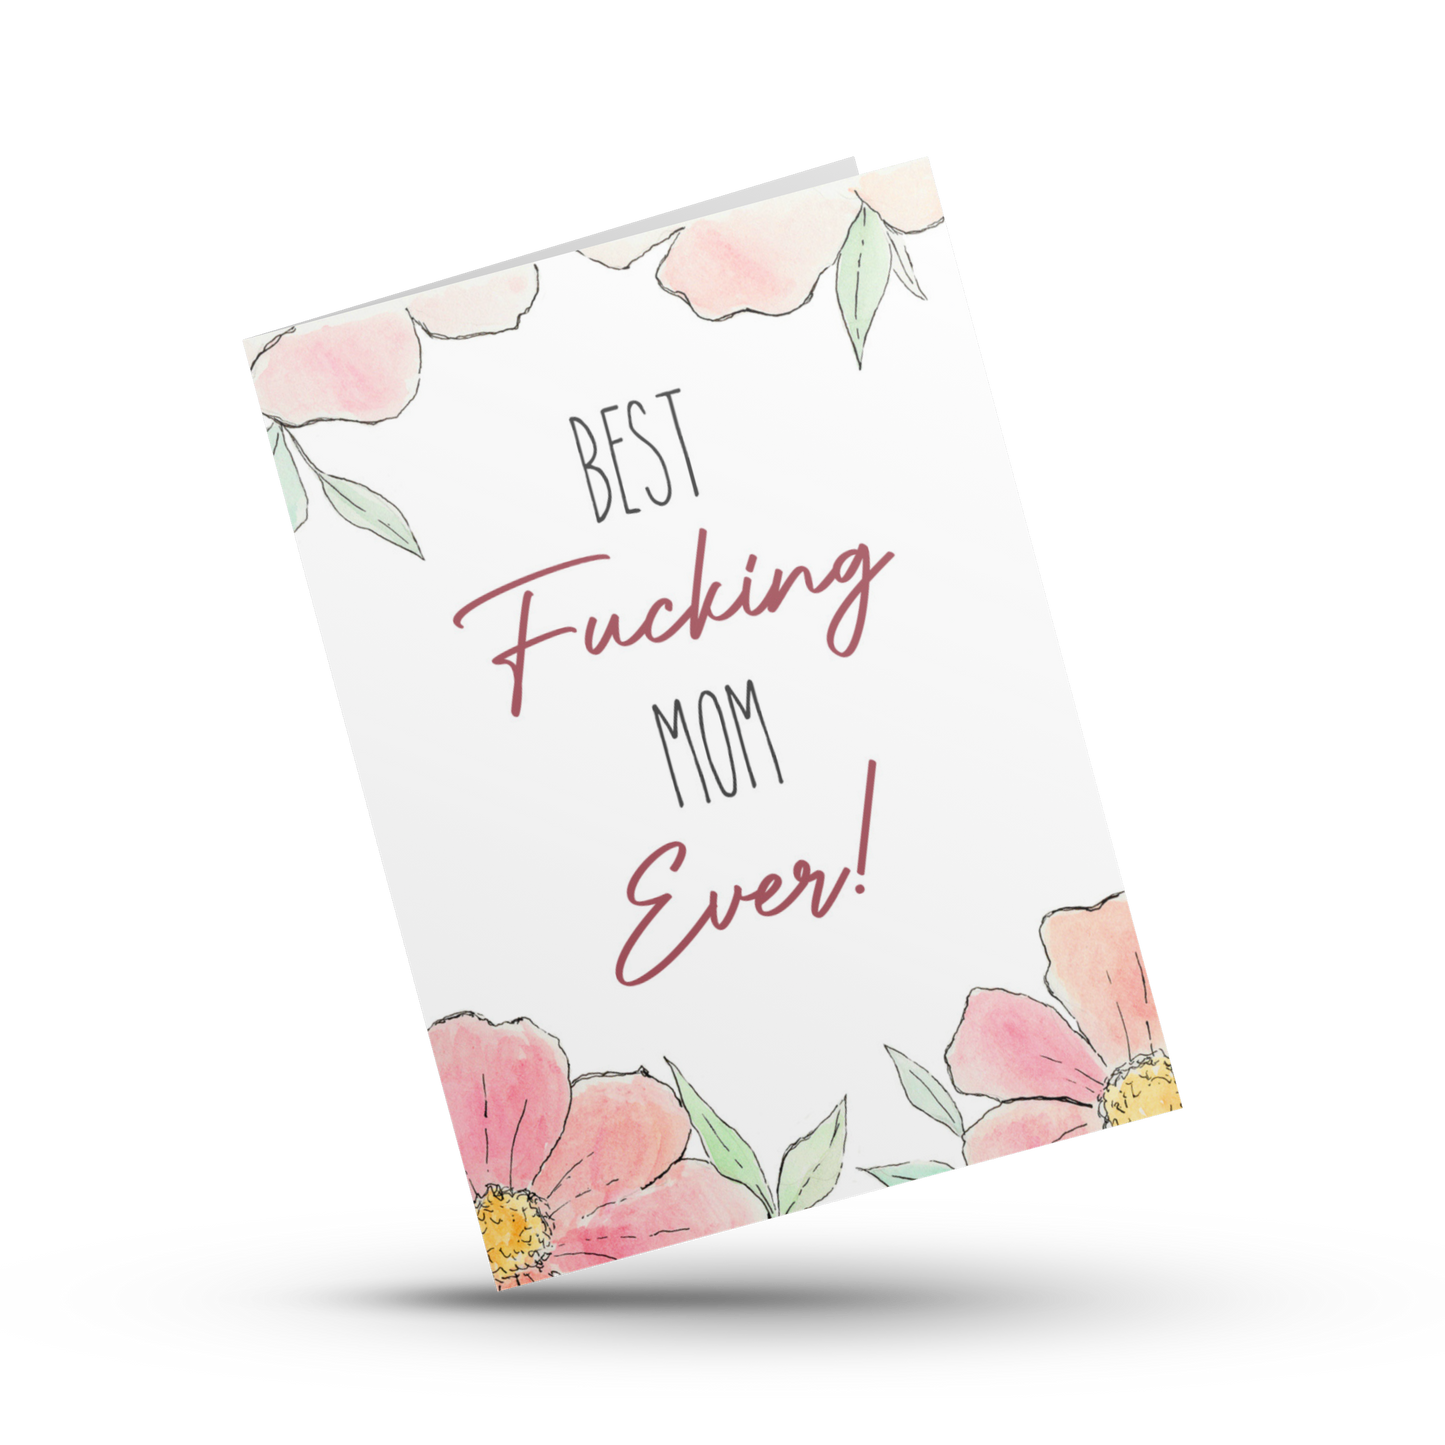 Best fucking mom ever, Mother's day card, Sweary card for mom, Funny Mother's day card, Card for friend, Cussing card, Cool mom gift,